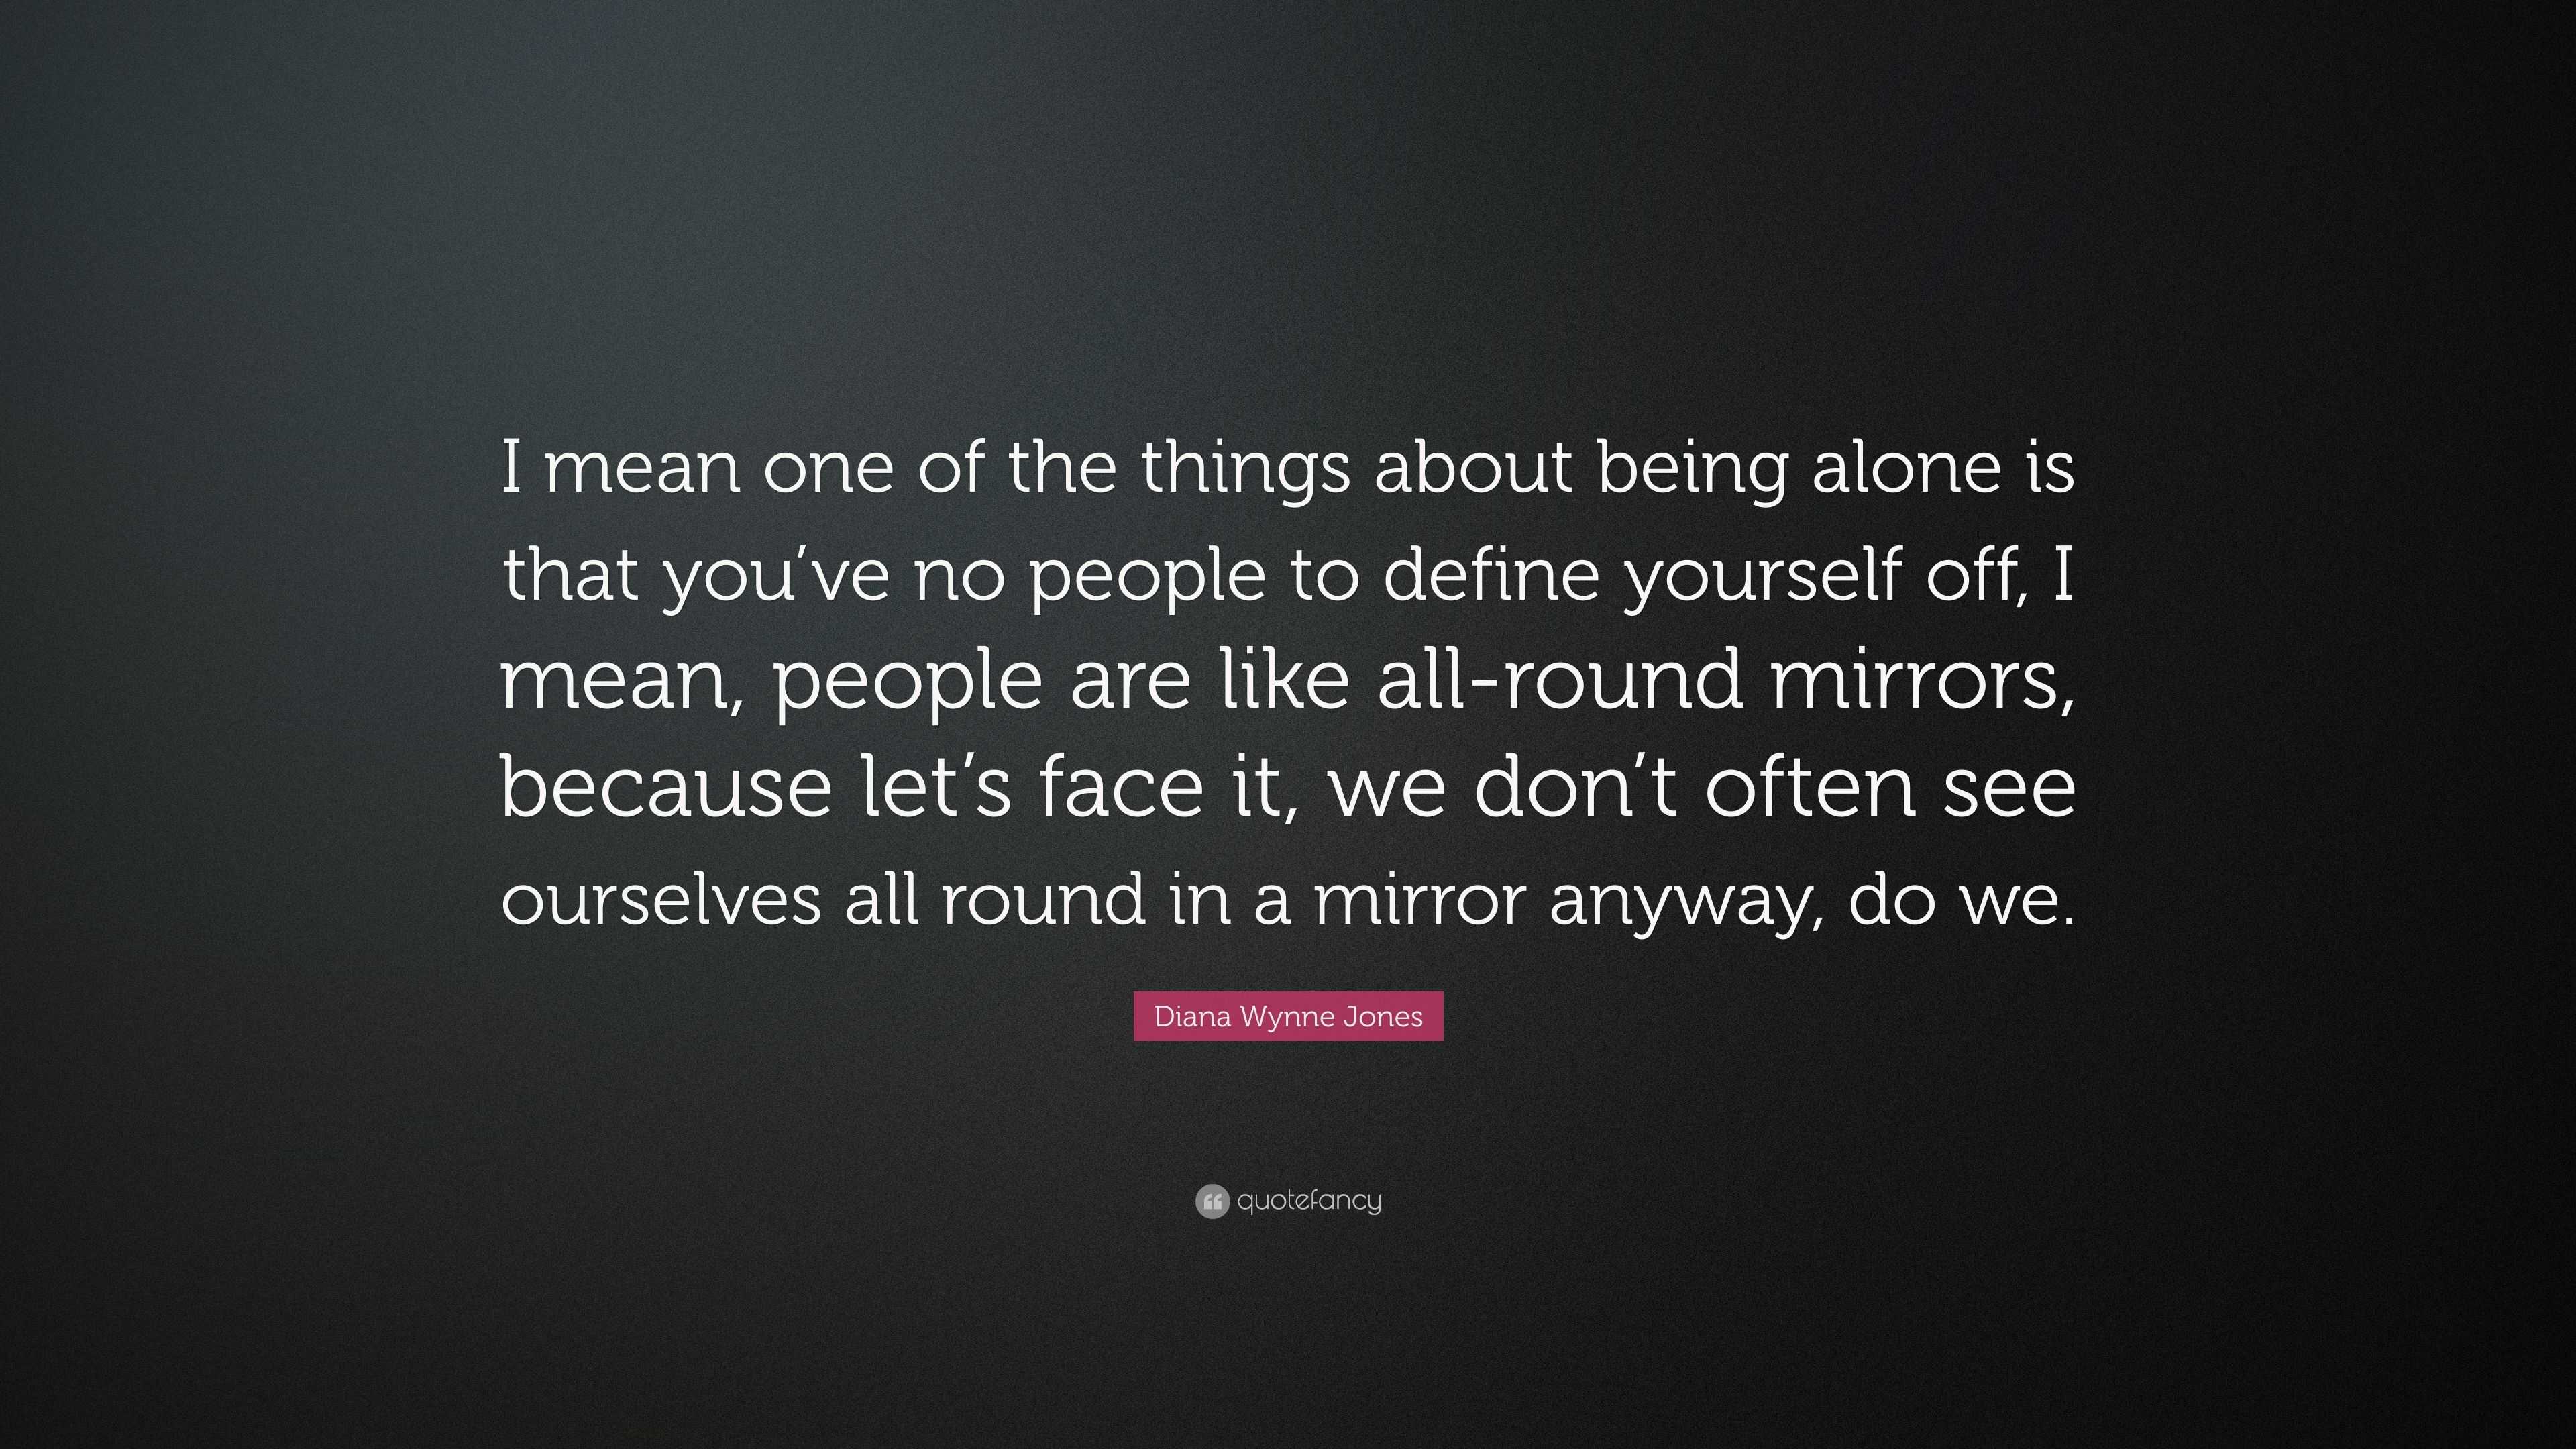 Diana Wynne Jones Quote: “I mean one of the things about being alone is ...